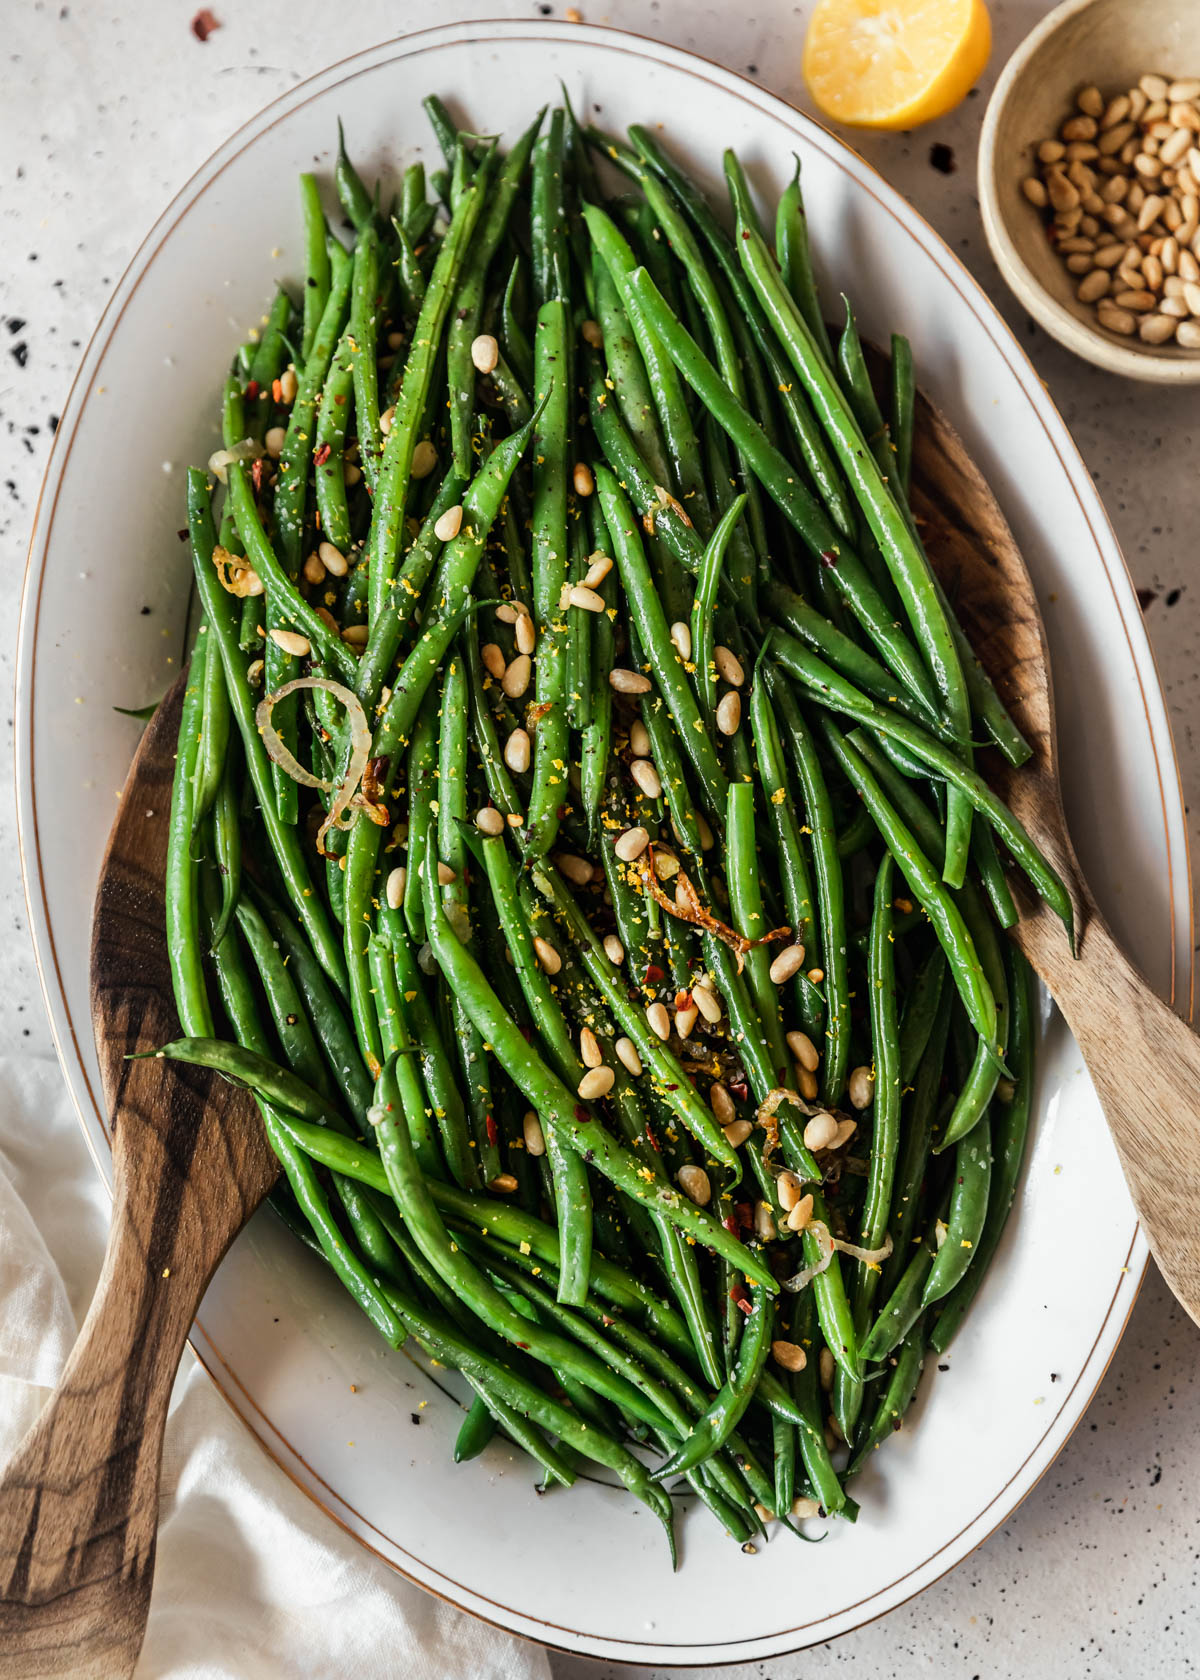 Lemony green beans with pine nuts and garlic on a white oval tray with wood salad tongs placed on a white speckled counter.